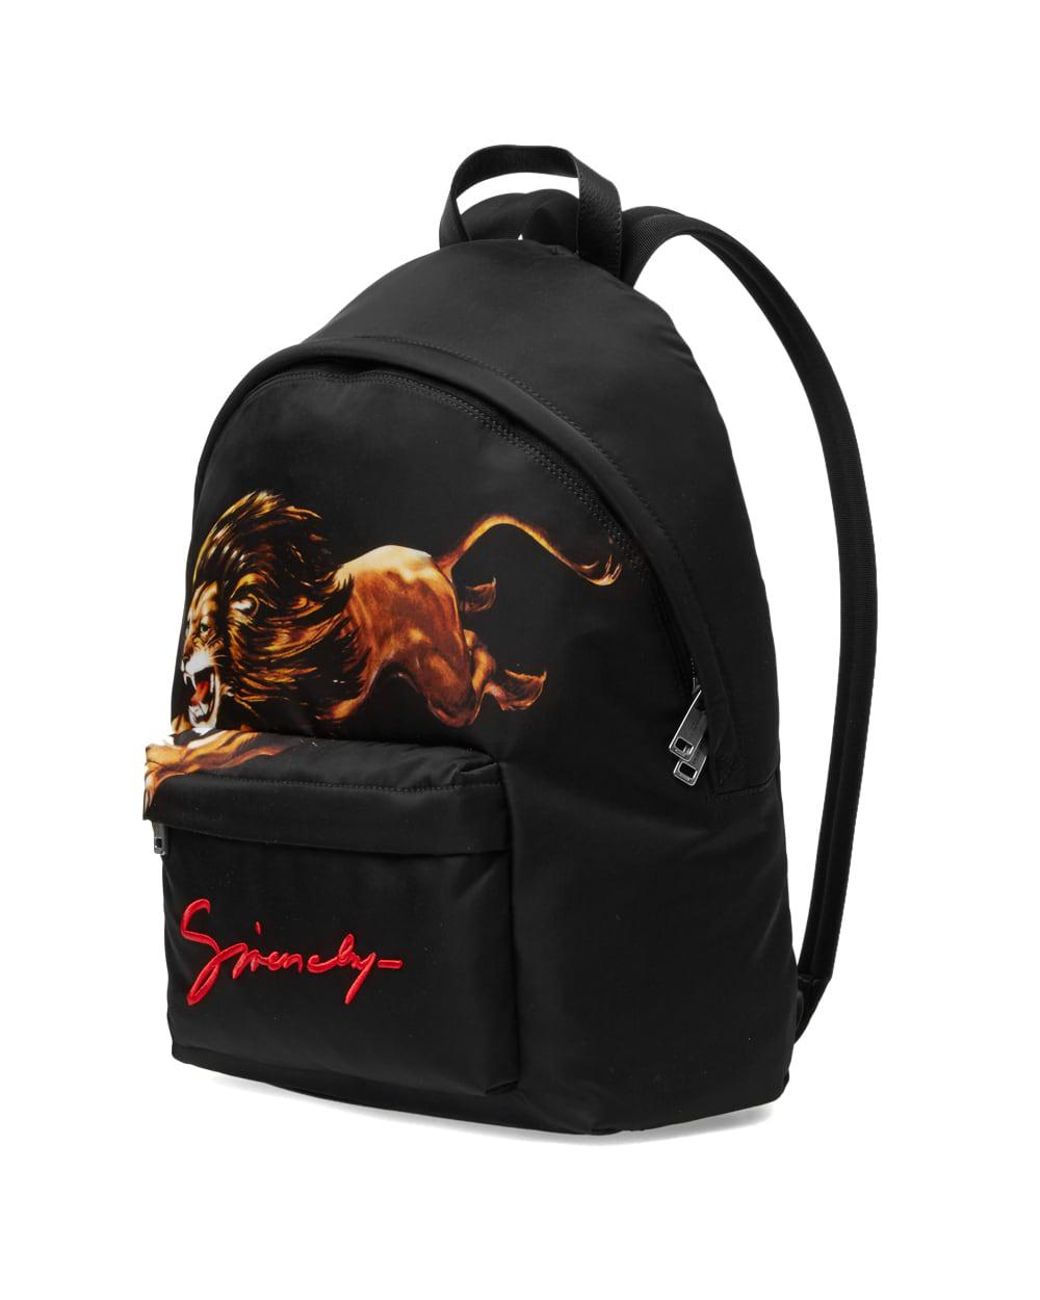 Givenchy Lion Print Backpack in Black | Lyst Australia